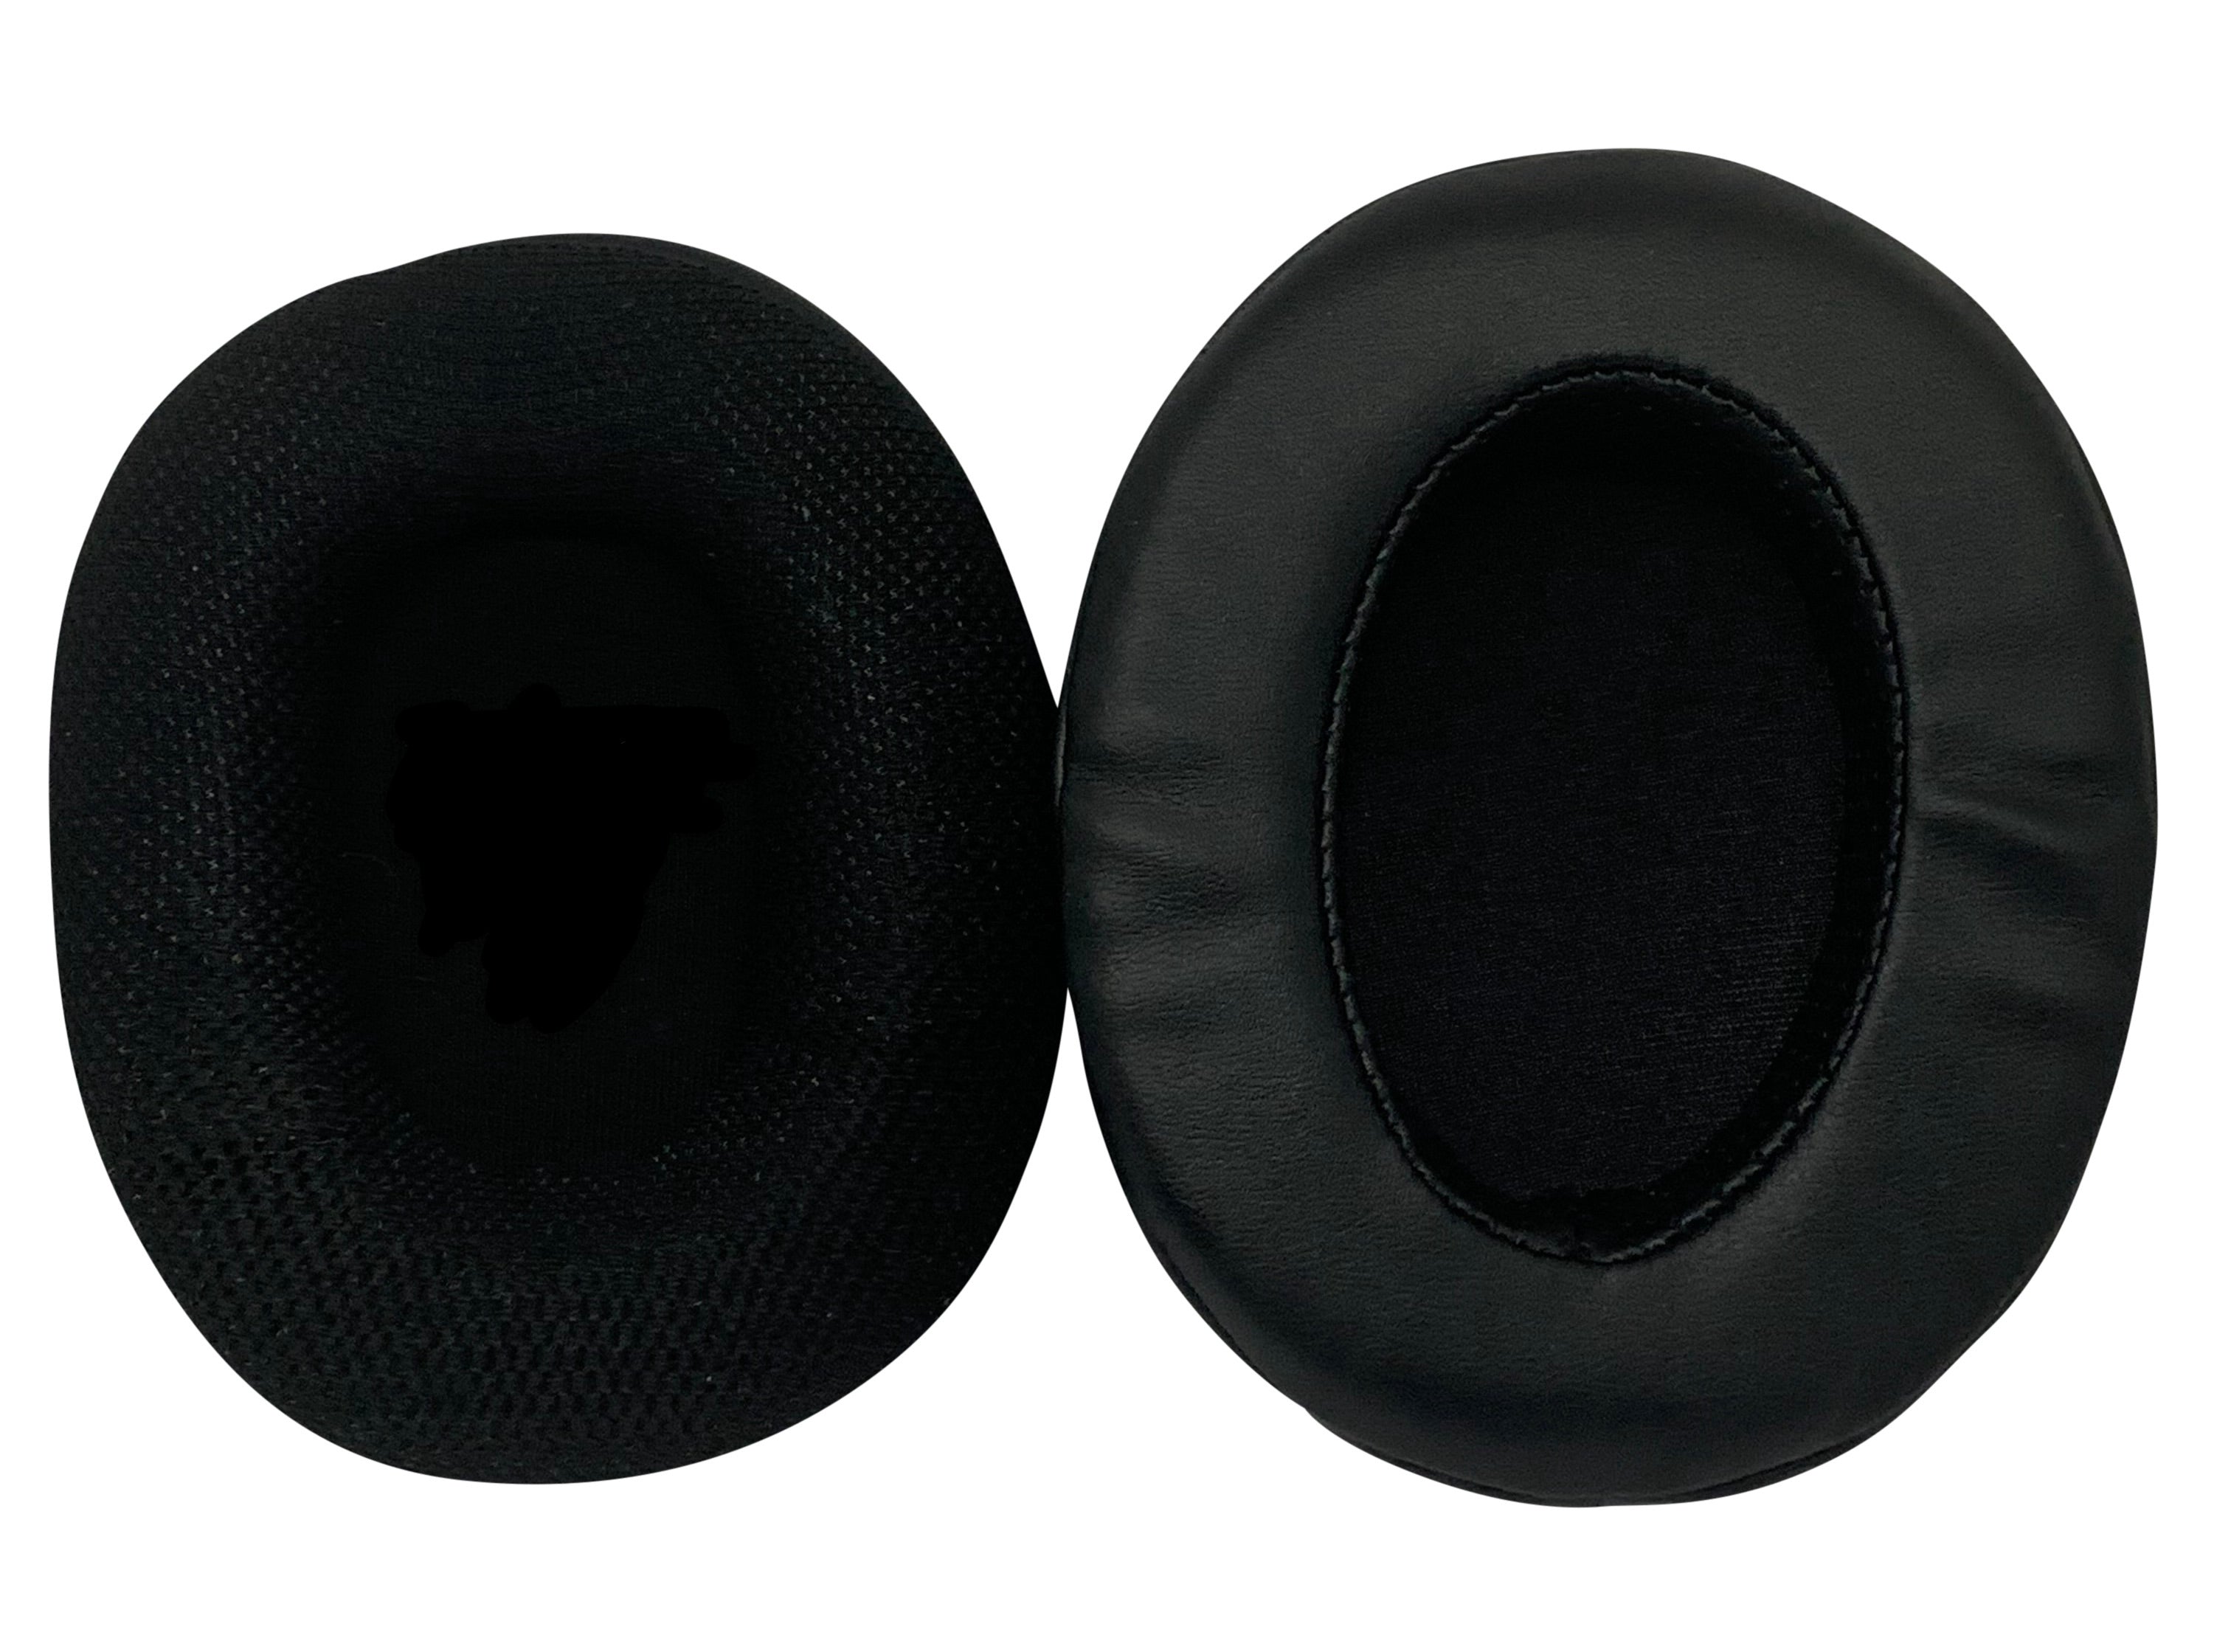 CentralSound Premium XL Replacement Ear Pads for Turtle Beach Gaming Headsets - CentralSound